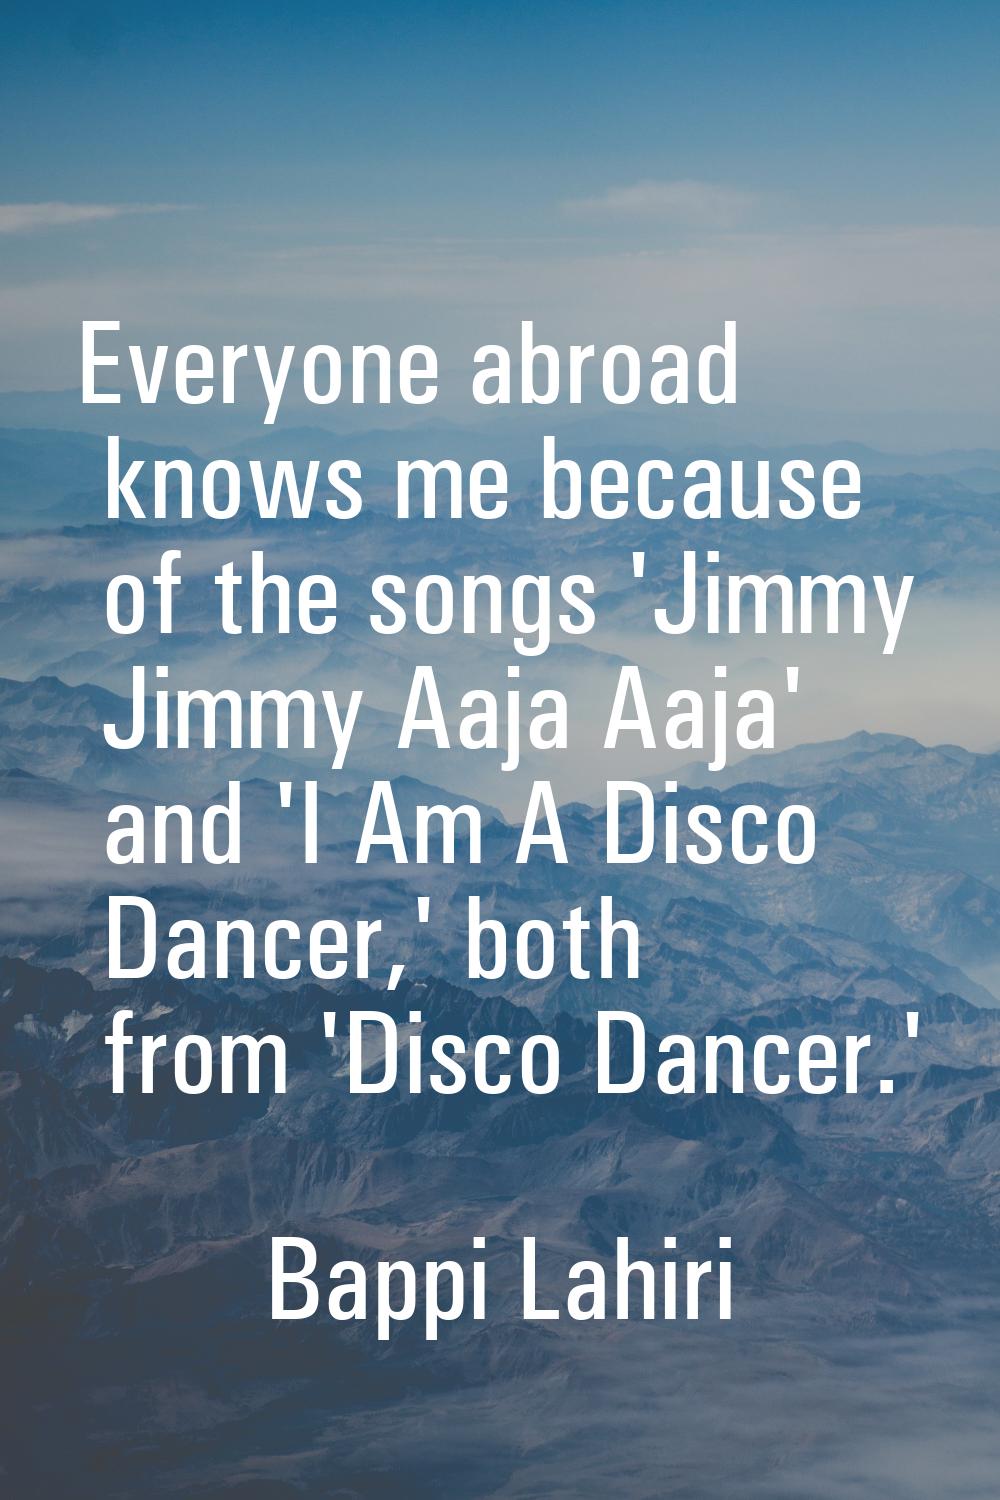 Everyone abroad knows me because of the songs 'Jimmy Jimmy Aaja Aaja' and 'I Am A Disco Dancer,' bo